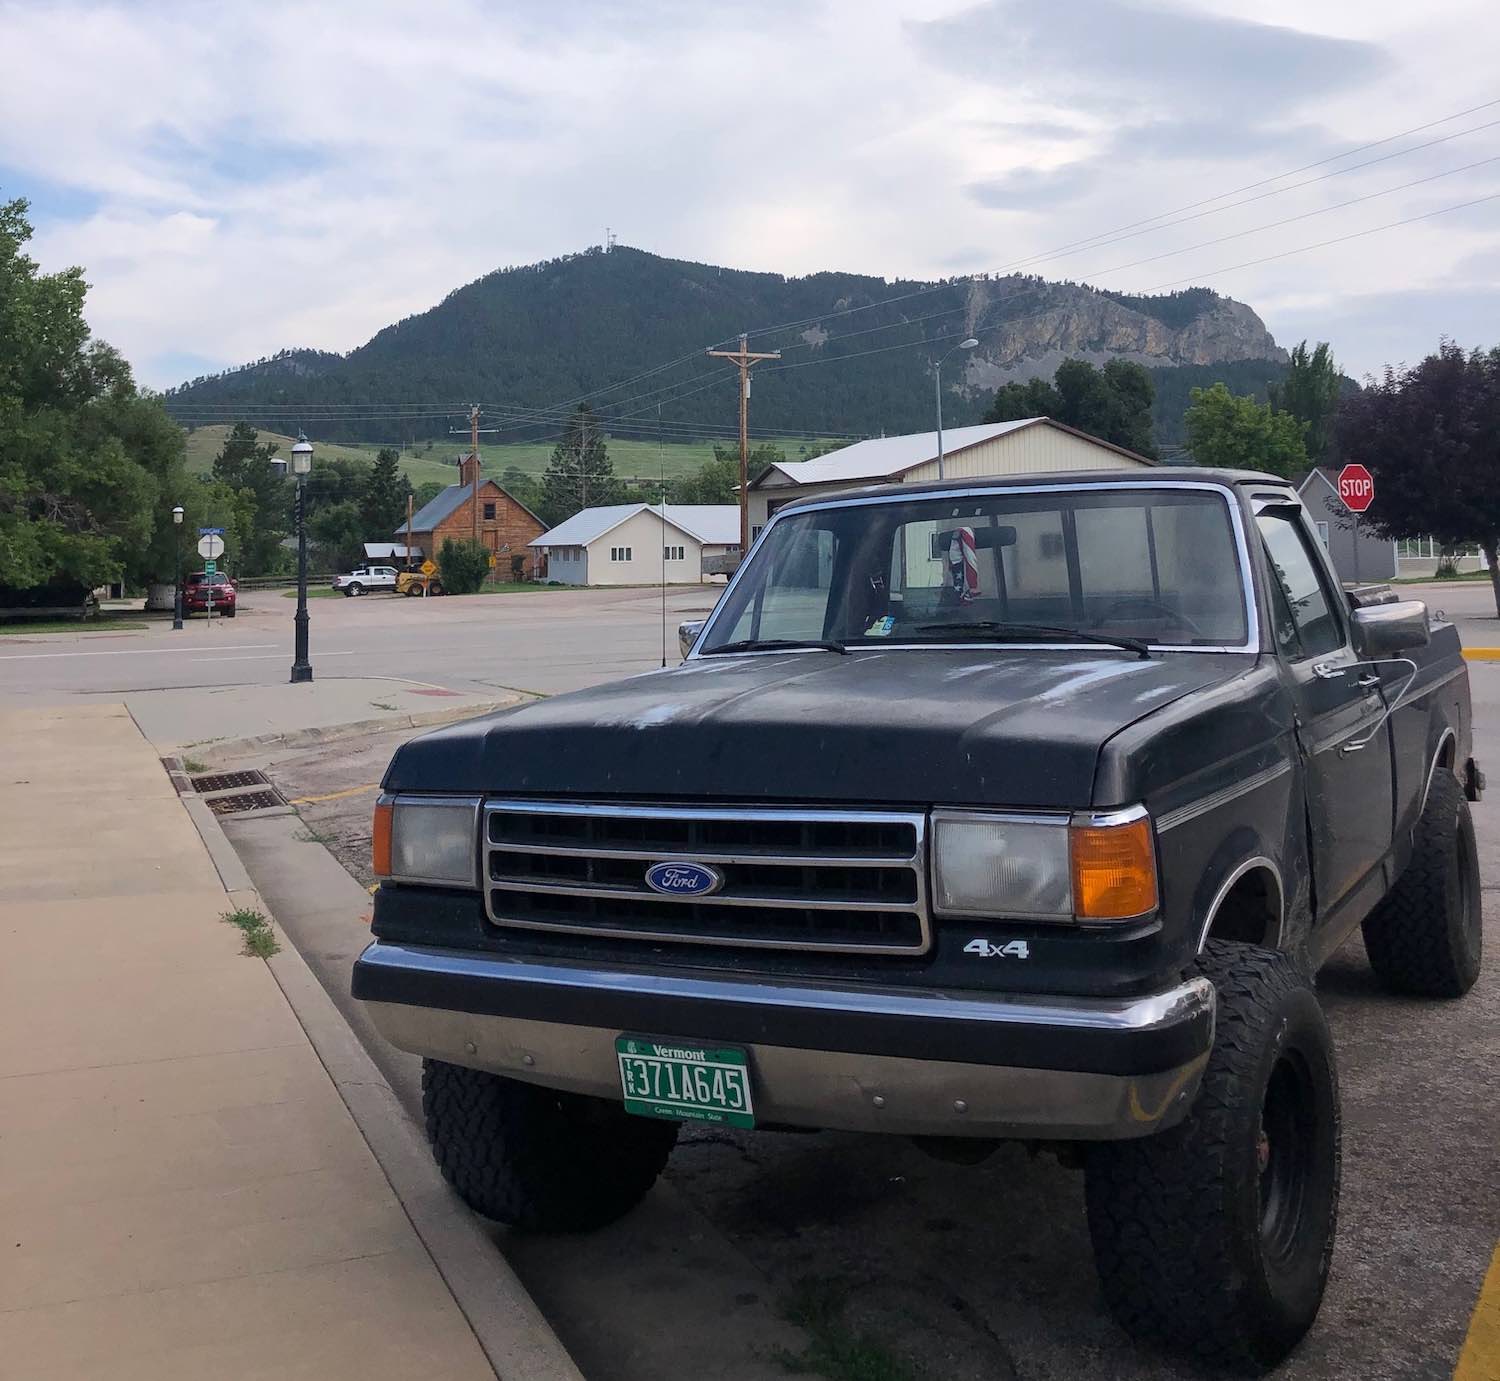 An old black Ford F-150 pickup truck parked in front of a mountain in Sundance, Wyoming.